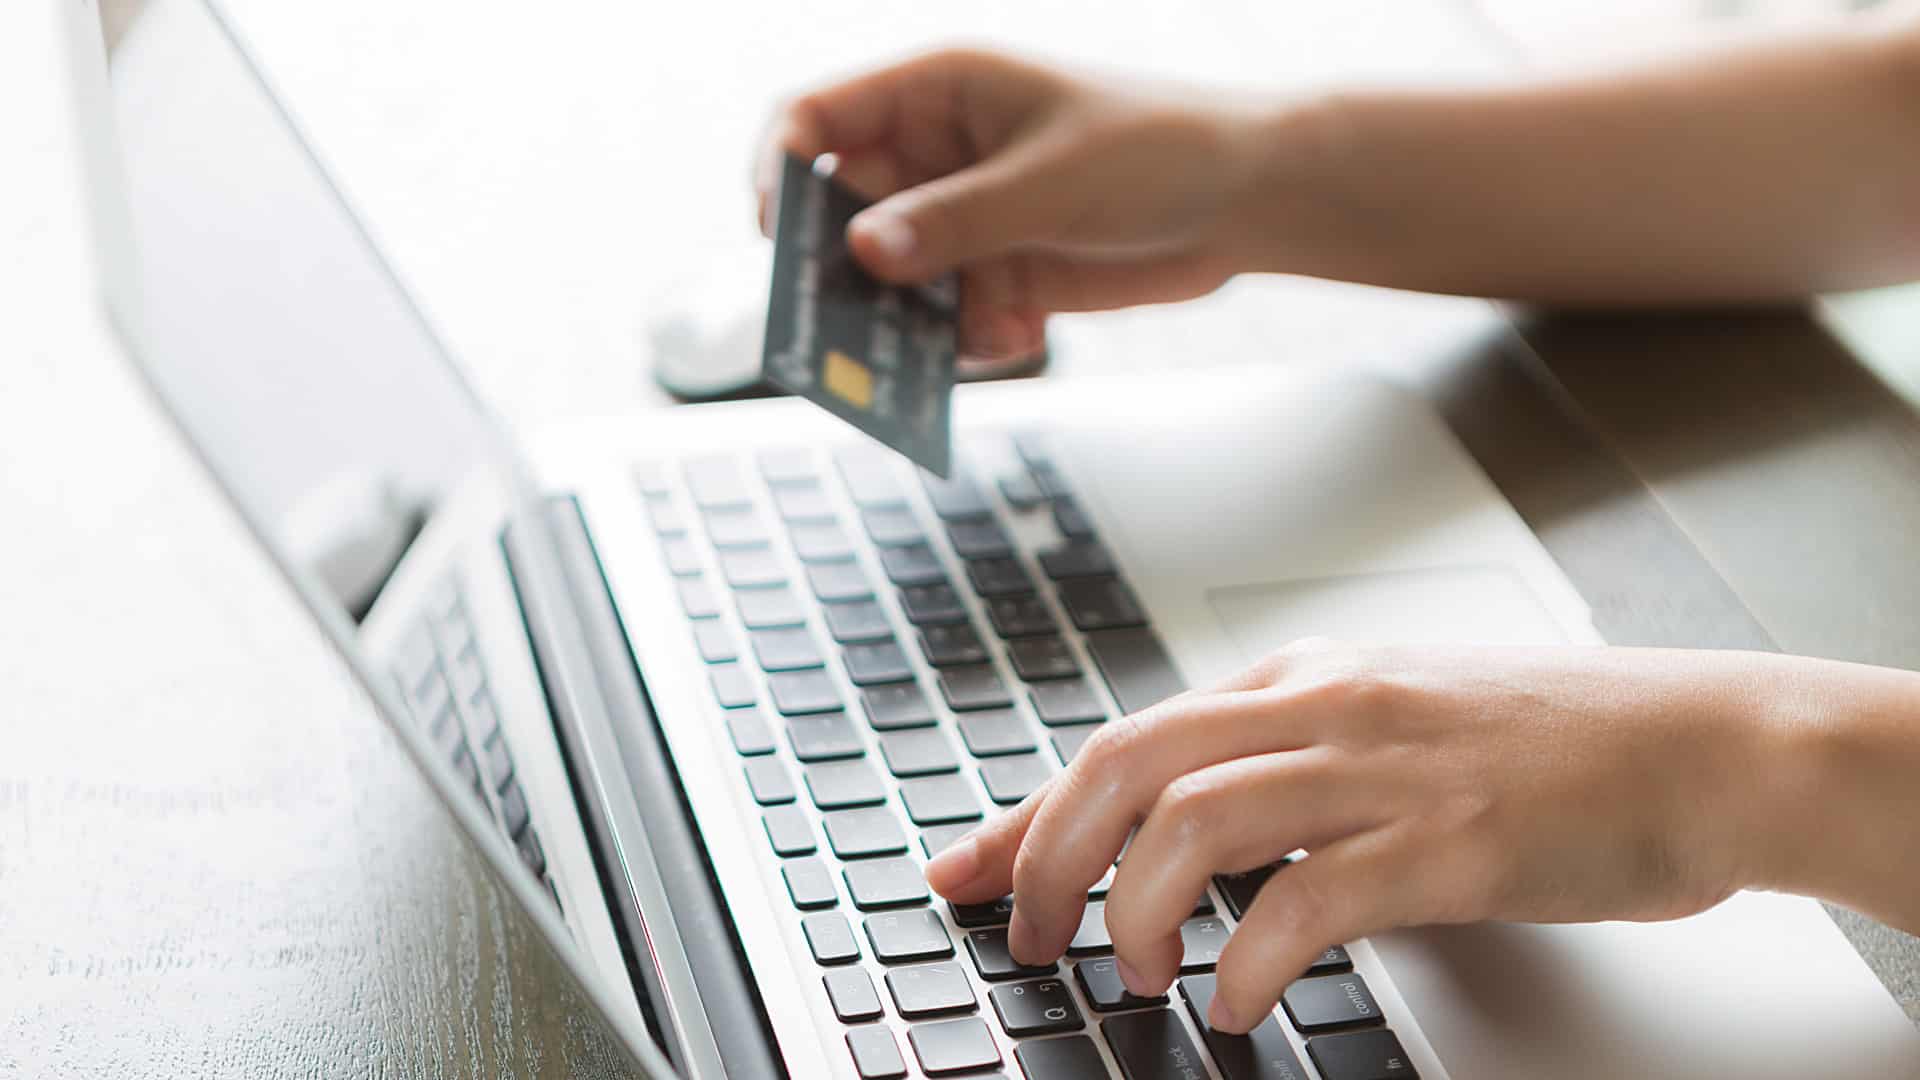 Online retailers lose over £1 billion annually due to lack of available payment methods